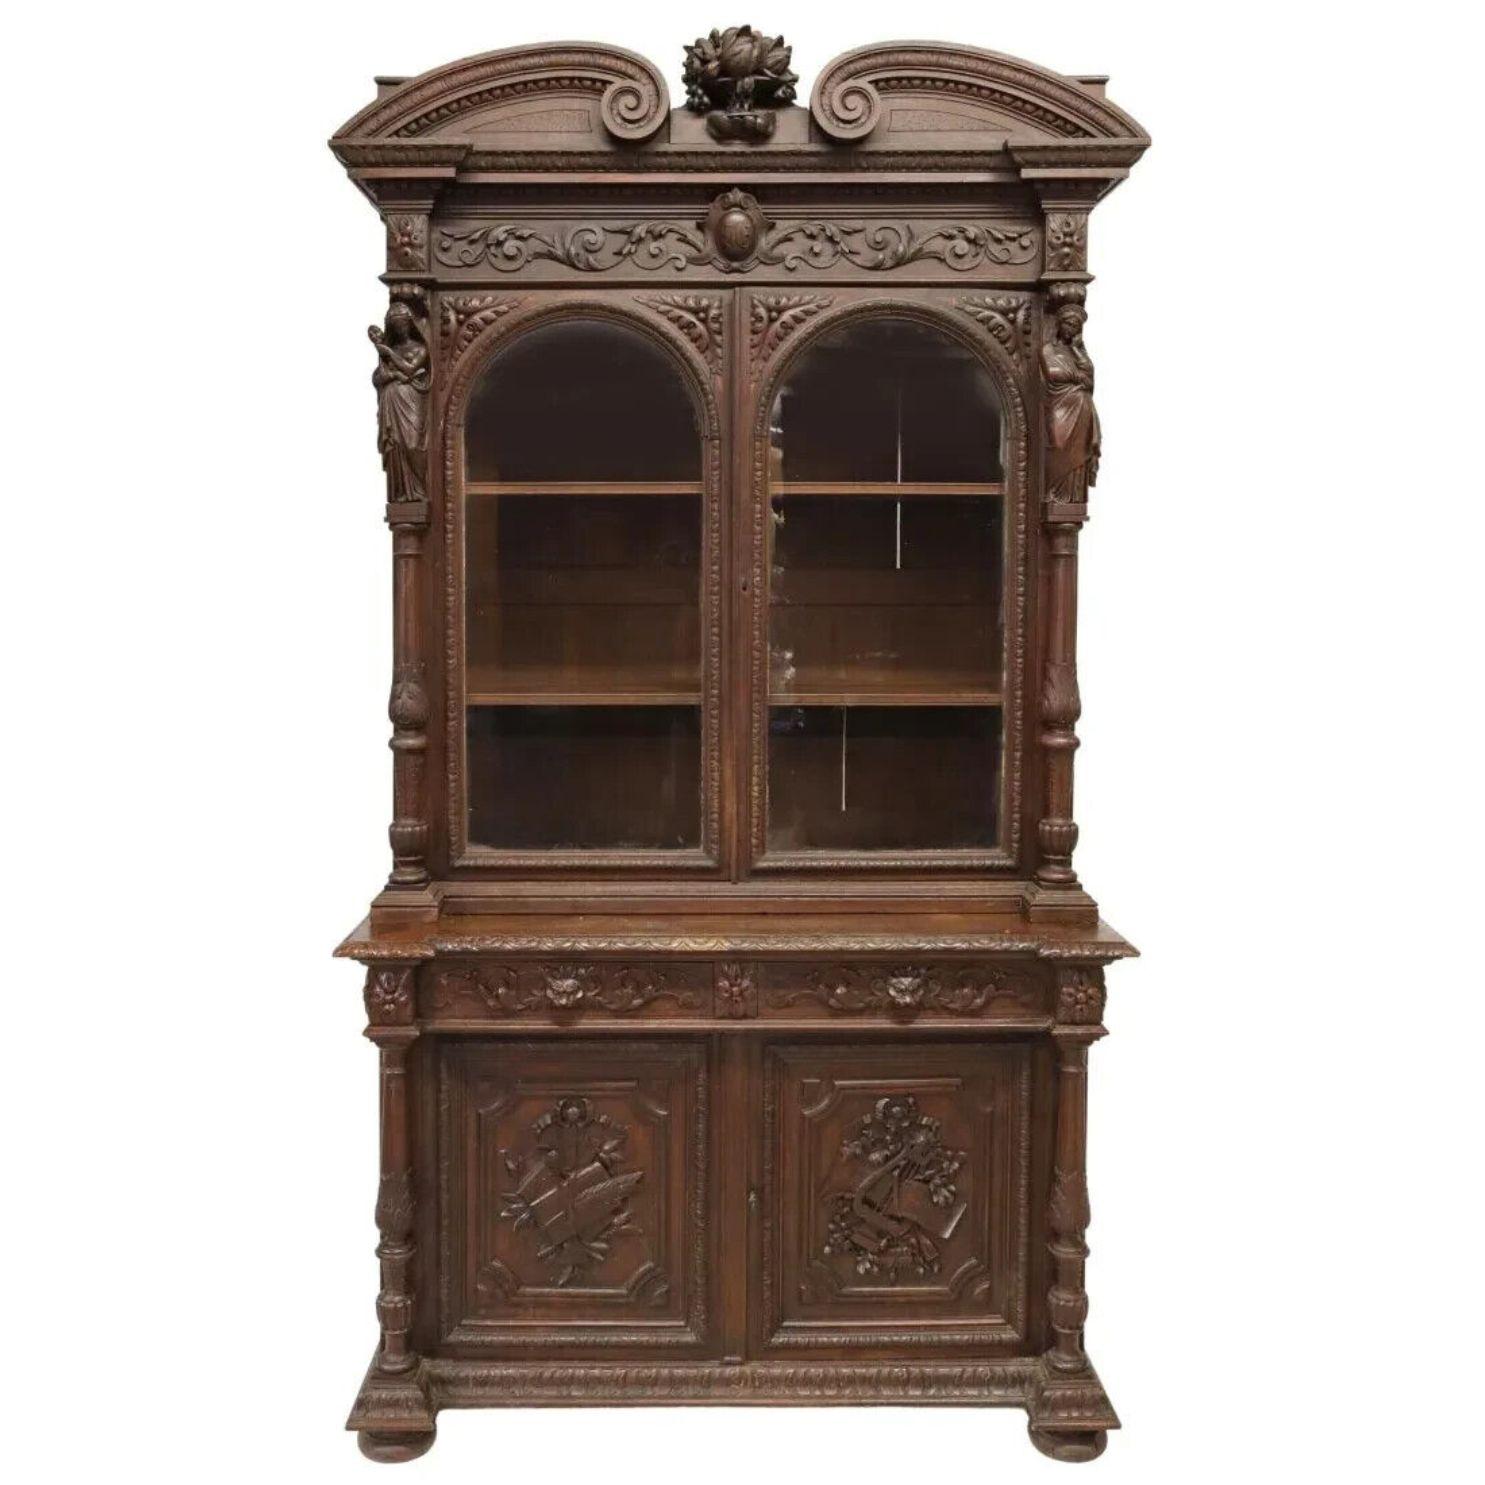 Absolutely Gorgeous Antique Bookcase, French, Figural, Carved Oak, Library, Stepback with Glazed Doors, 1800s, 19th century!!

French oak stepback bookcase, late 19th Century 1800's, molded cornice, frieze with monogrammed cartouche framed by